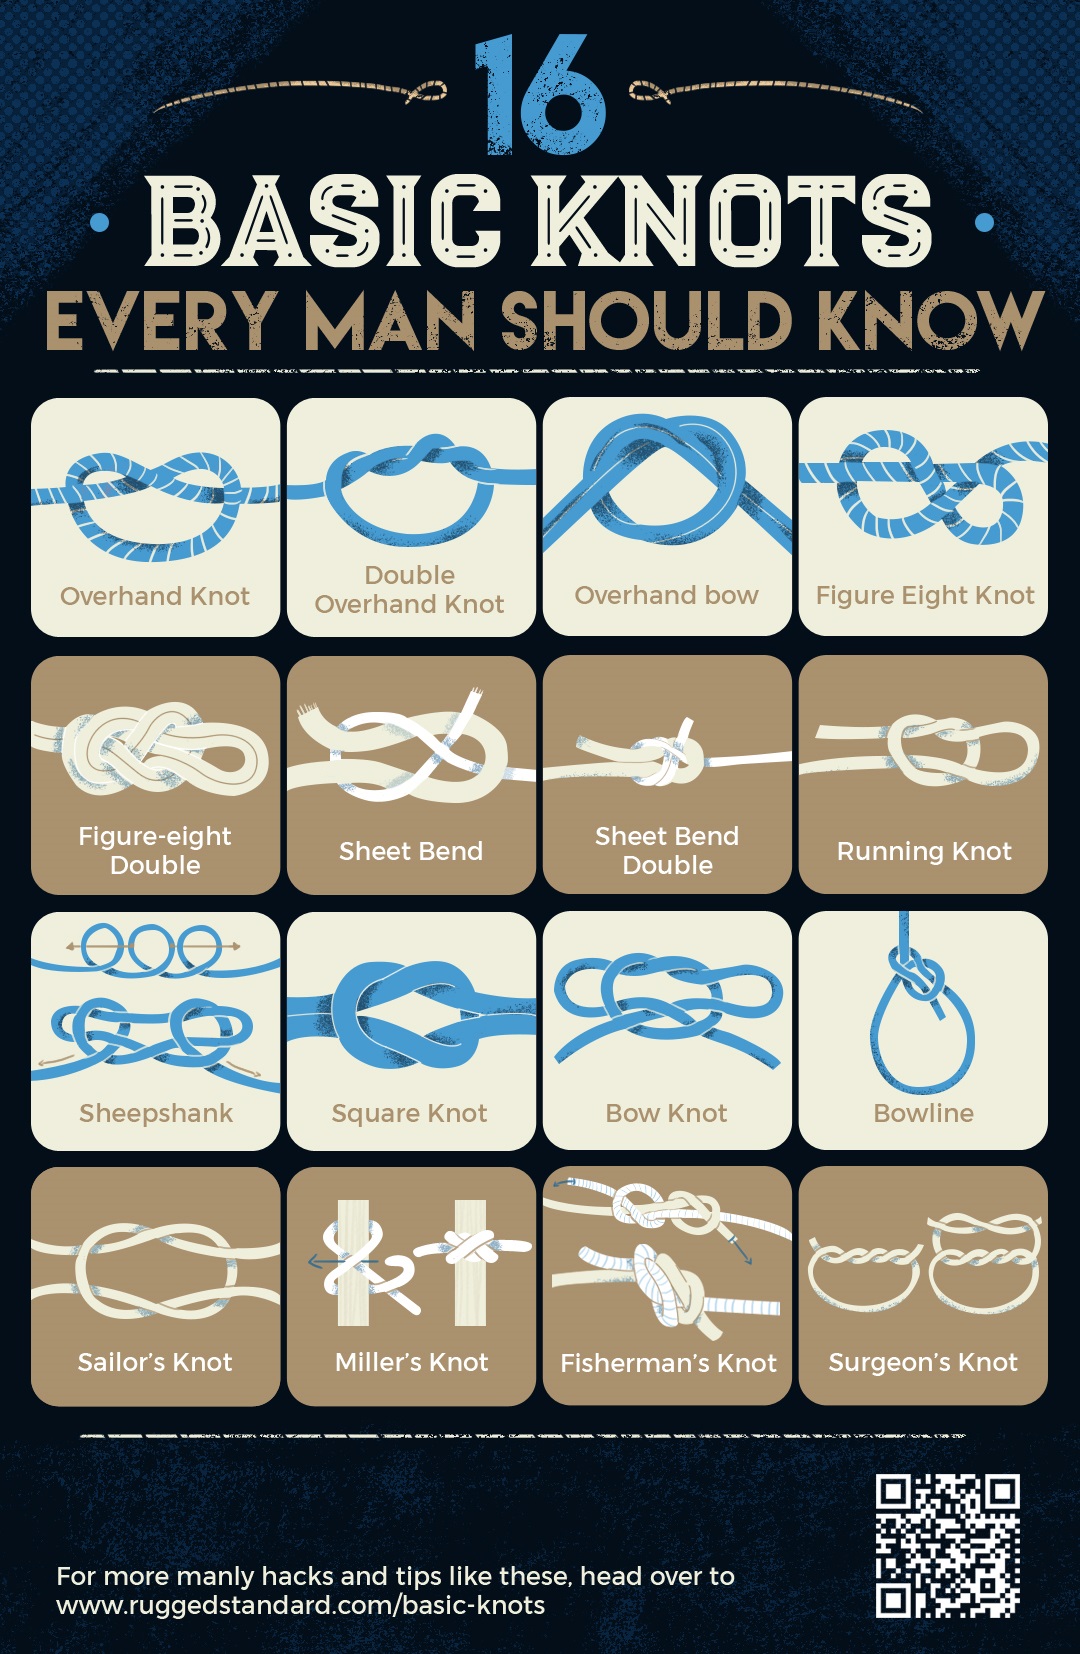 infographic | 16 Basic Knots Every Man Should Know | Rugged Standard | Bowline knot | how to tie knots | camping knots